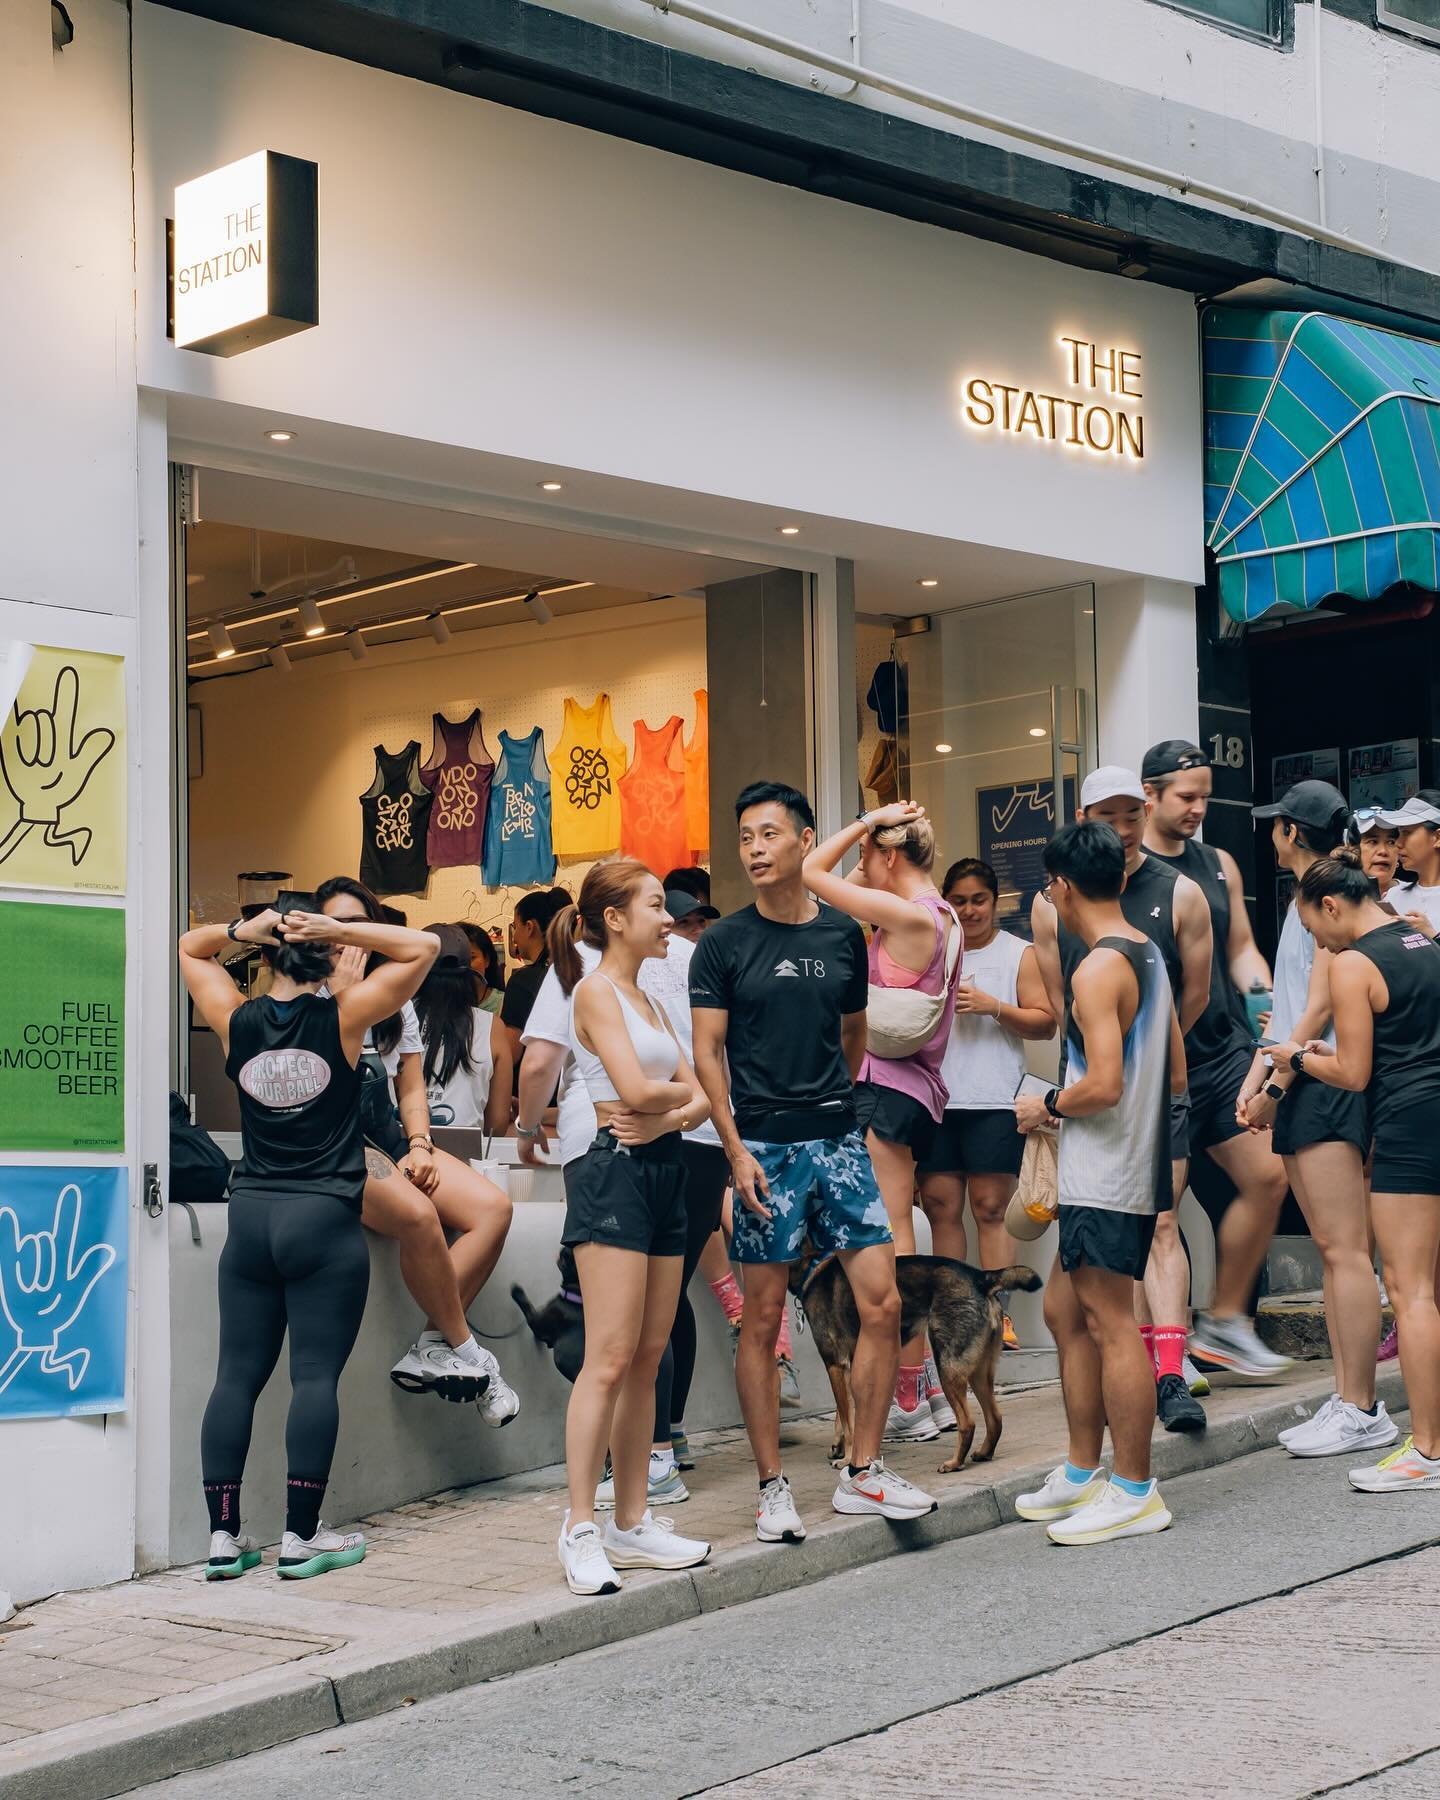 We love playing a part in this monthly event that brings people together through the power of runs and walks, building connection and community. 🏃🫶👥

Stay tuned and join us in the next event! 🗓️

FILL YOUR CUP
Monthly Run/Walk/Talk Collective

Or